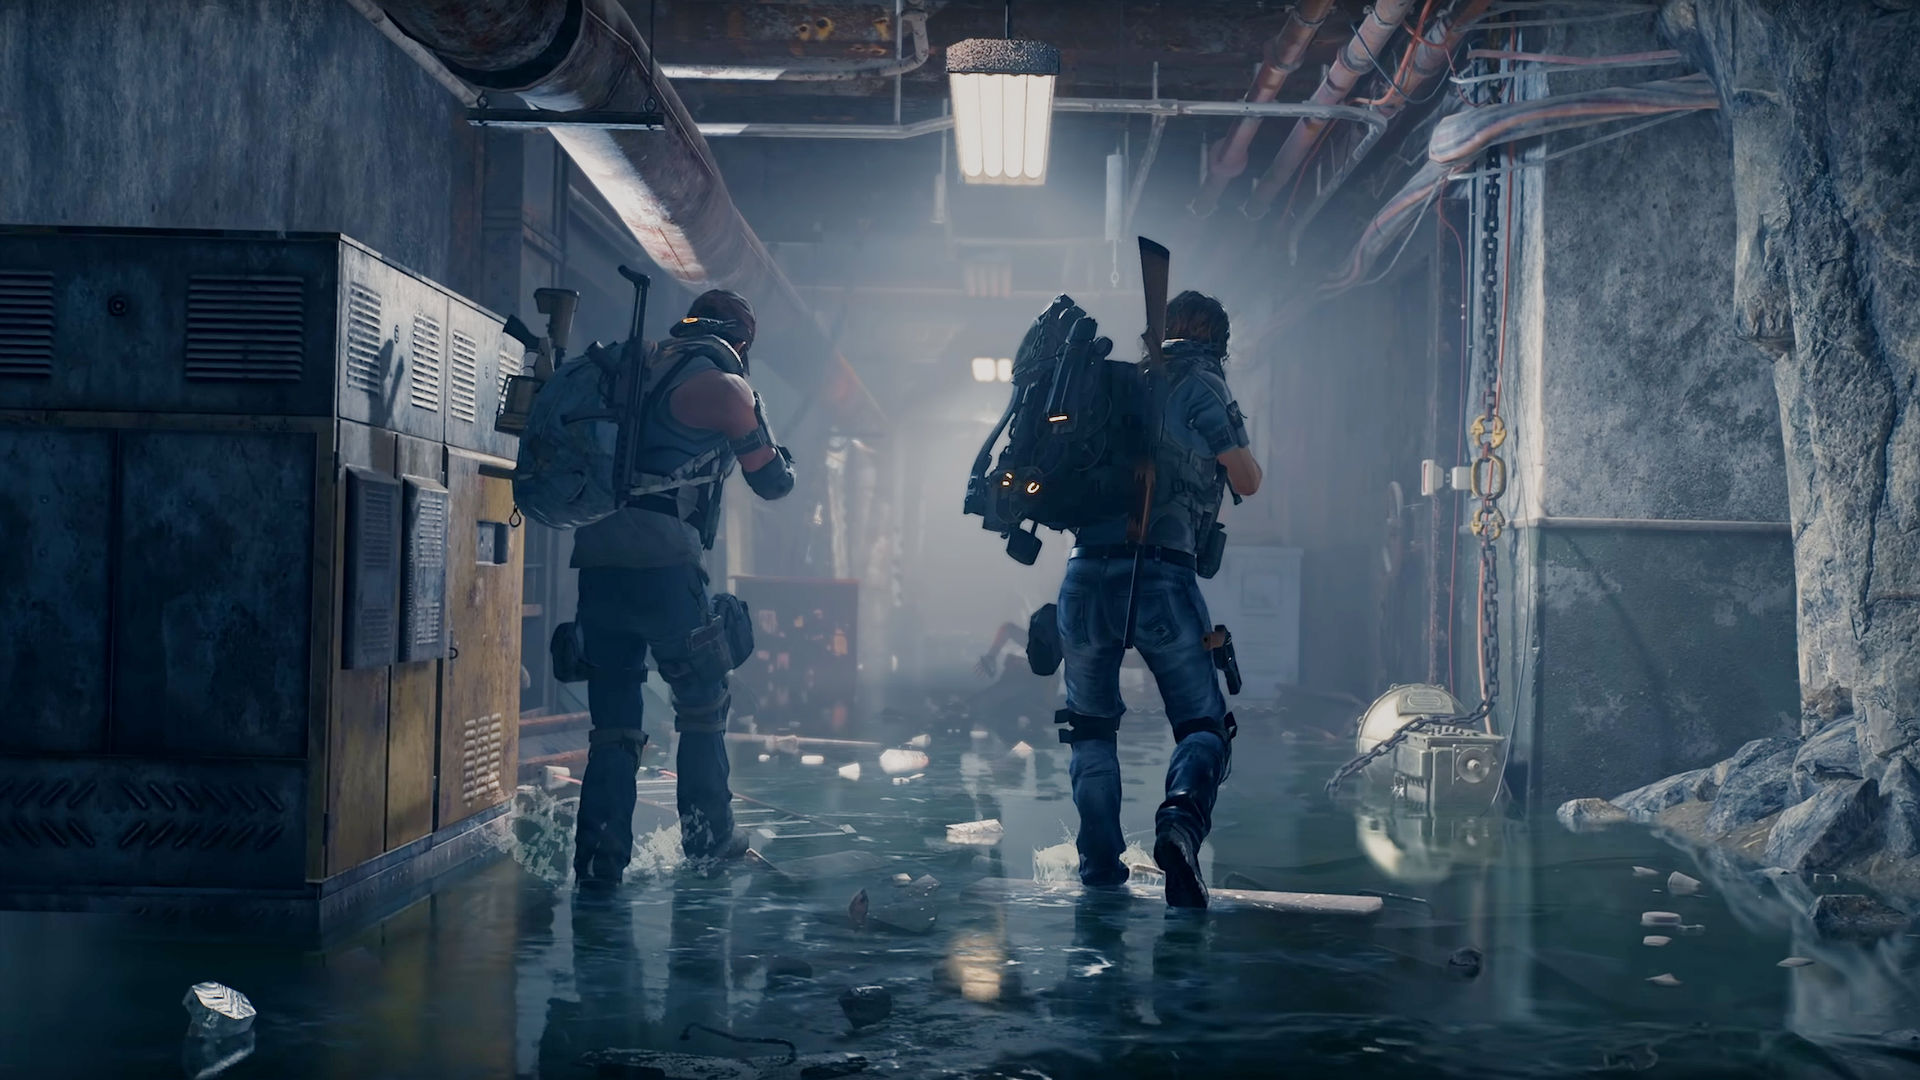 the division 2 pc where to buy